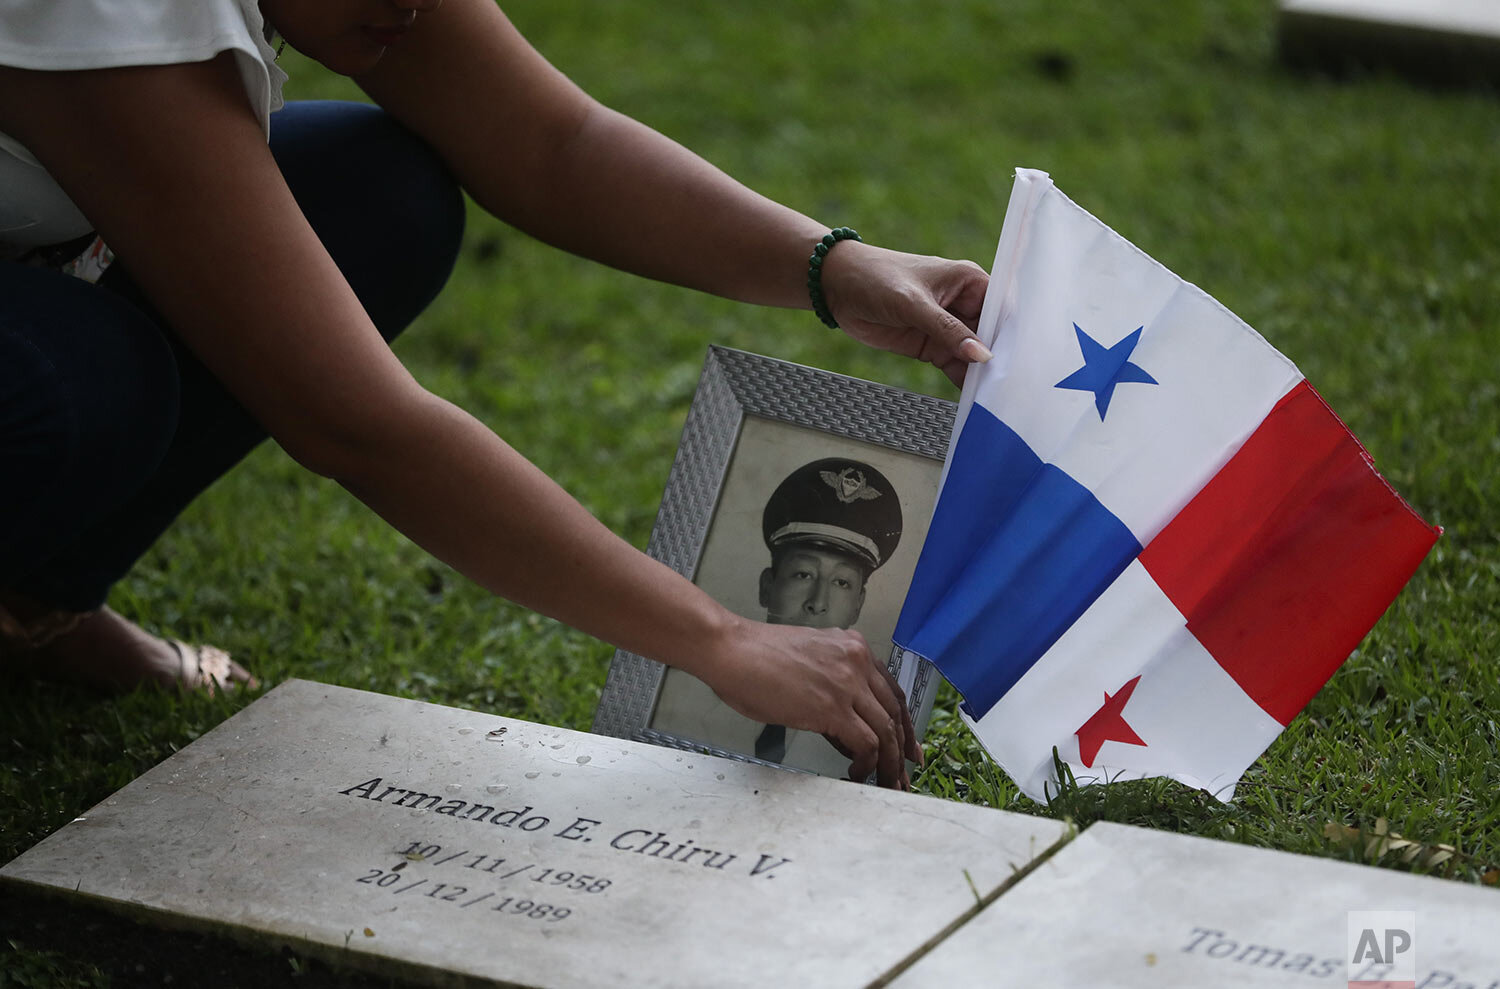  A woman places a Panamanian flag on the grave of a military man who died during the 1989 U.S. military invasion that ousted Panama's strongman Manuel Noriega, on the 30th anniversary of the invasion in Panama City, Dec. 20, 2019. According to offici